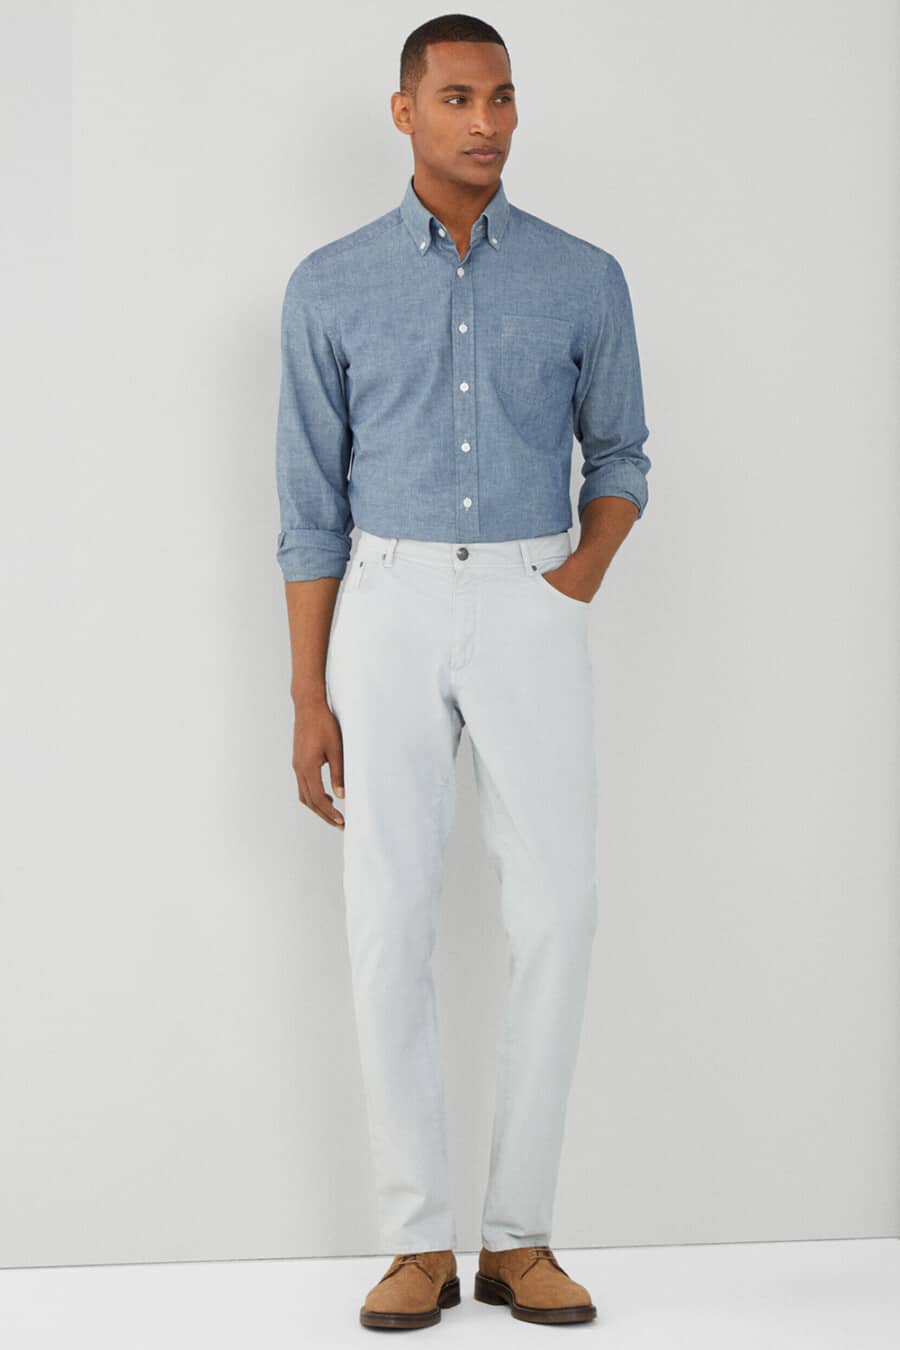 Men's white jeans, tucked in chambray dress shirt and tan suede Derby shoes outfit